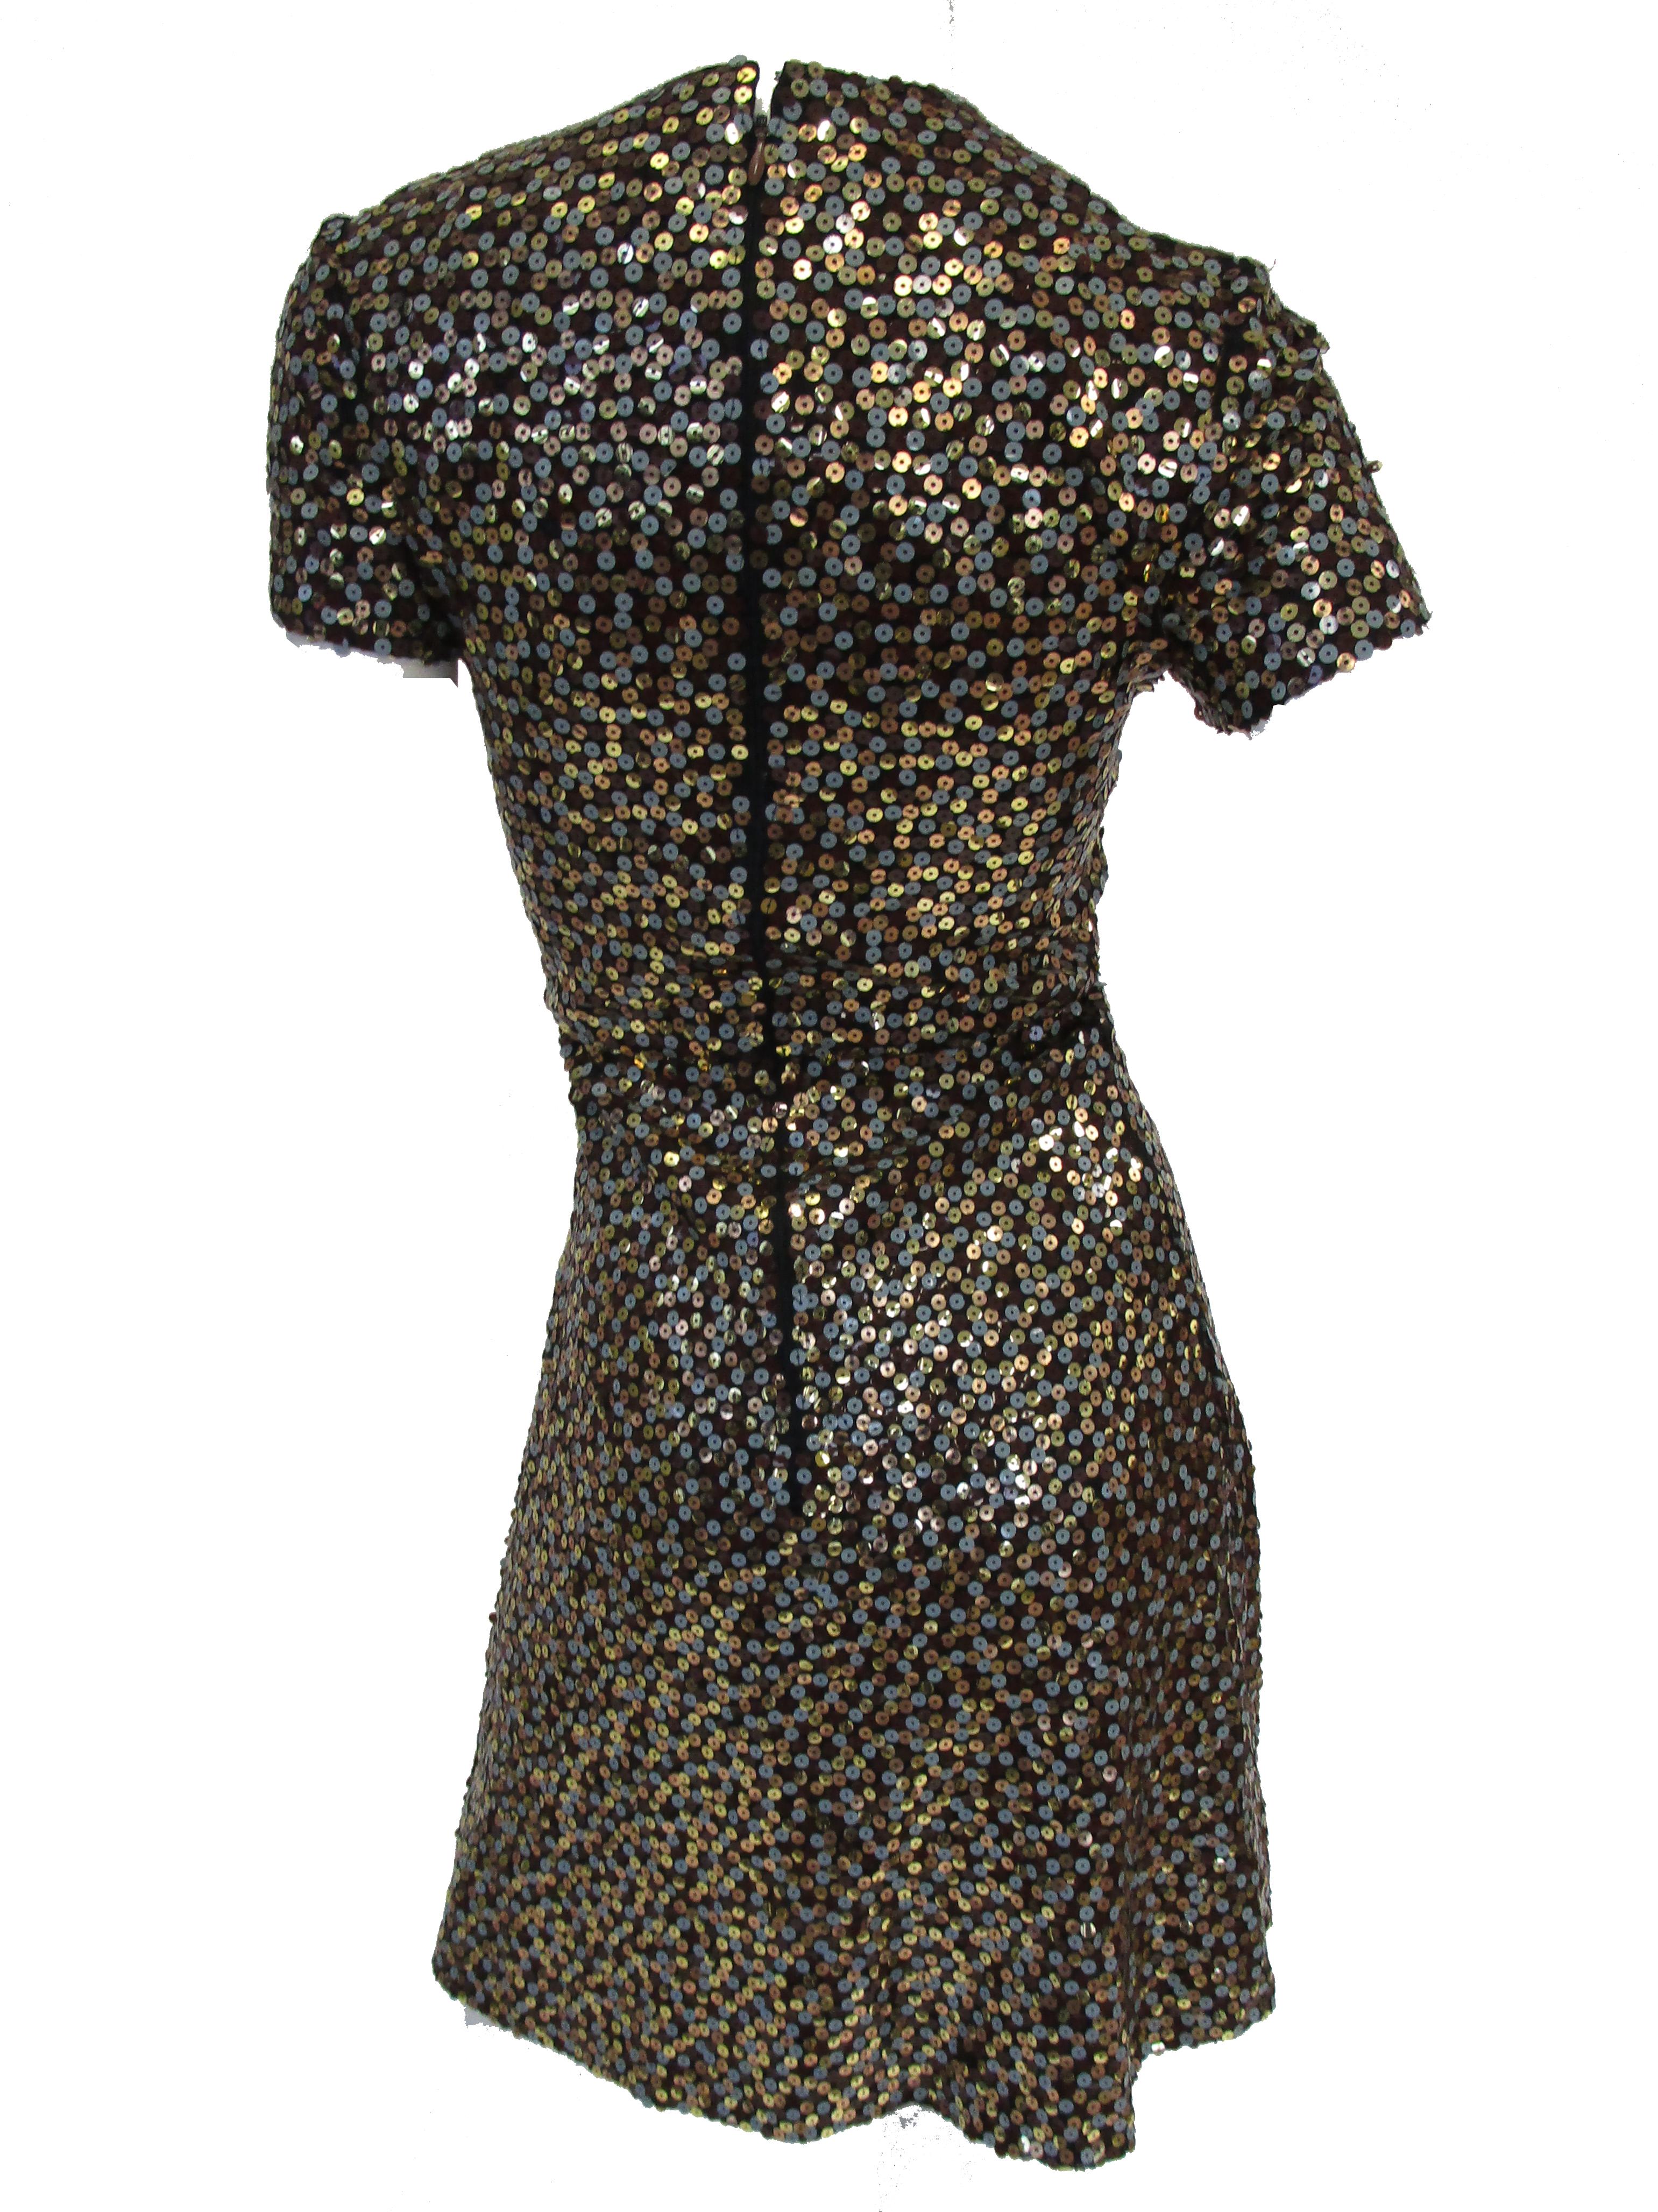 Women's 1960s Bill Blass Grey and Gold Sequin Dress with Sequin Lined Jacket xxs